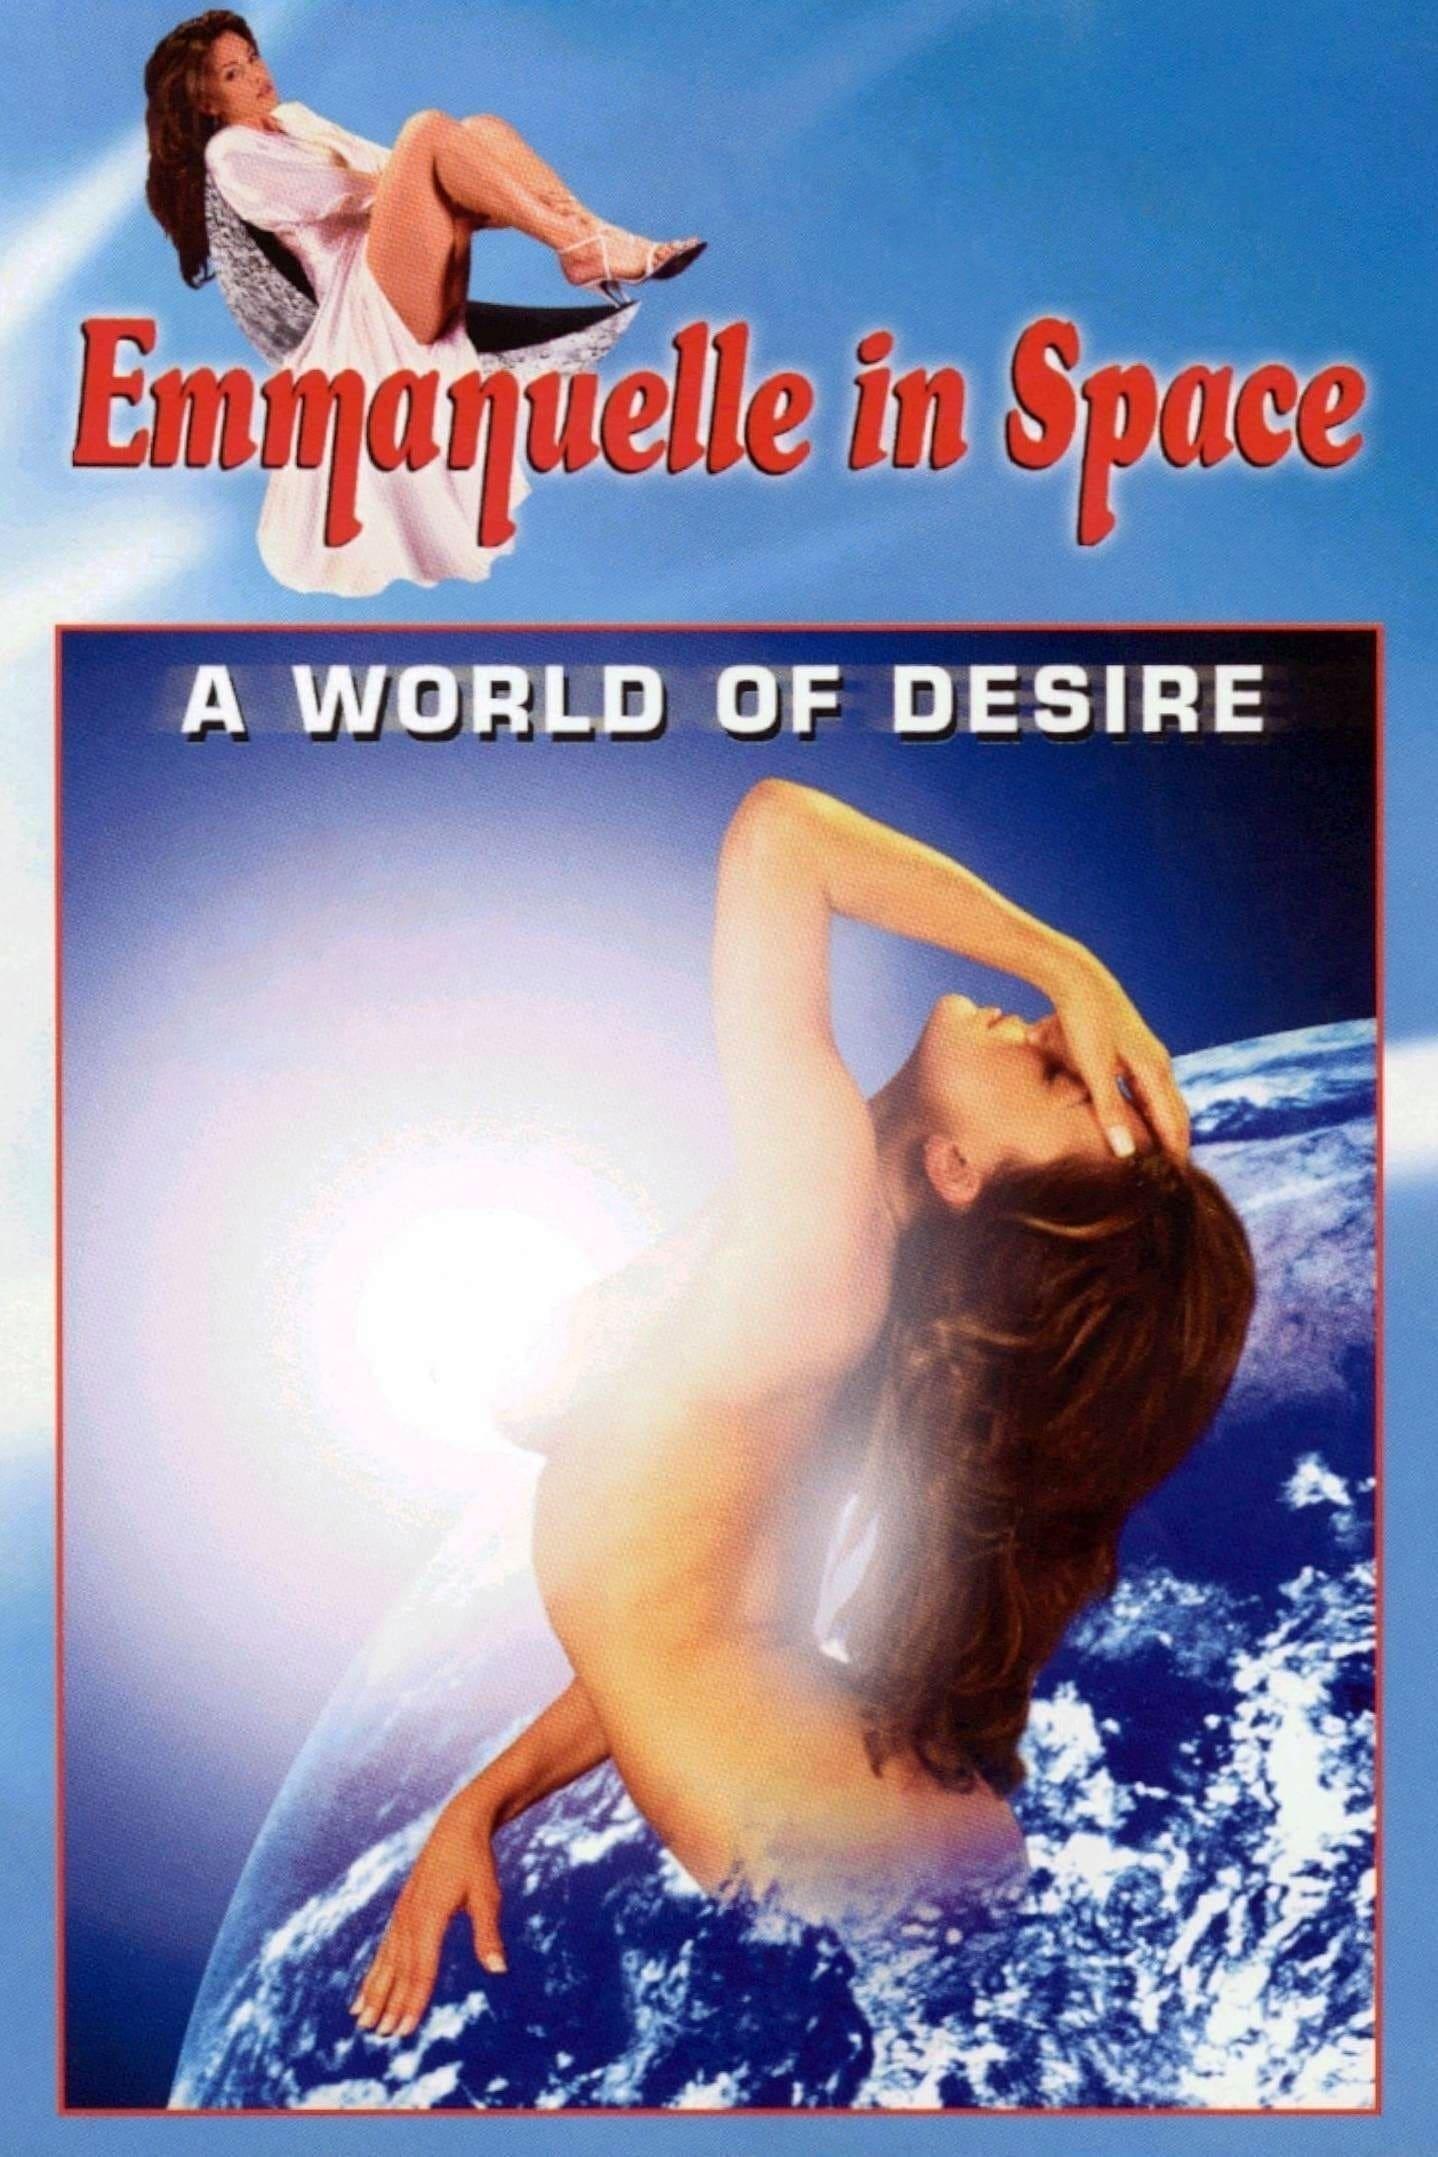 Emmanuelle in Space 2: A World of Desire poster